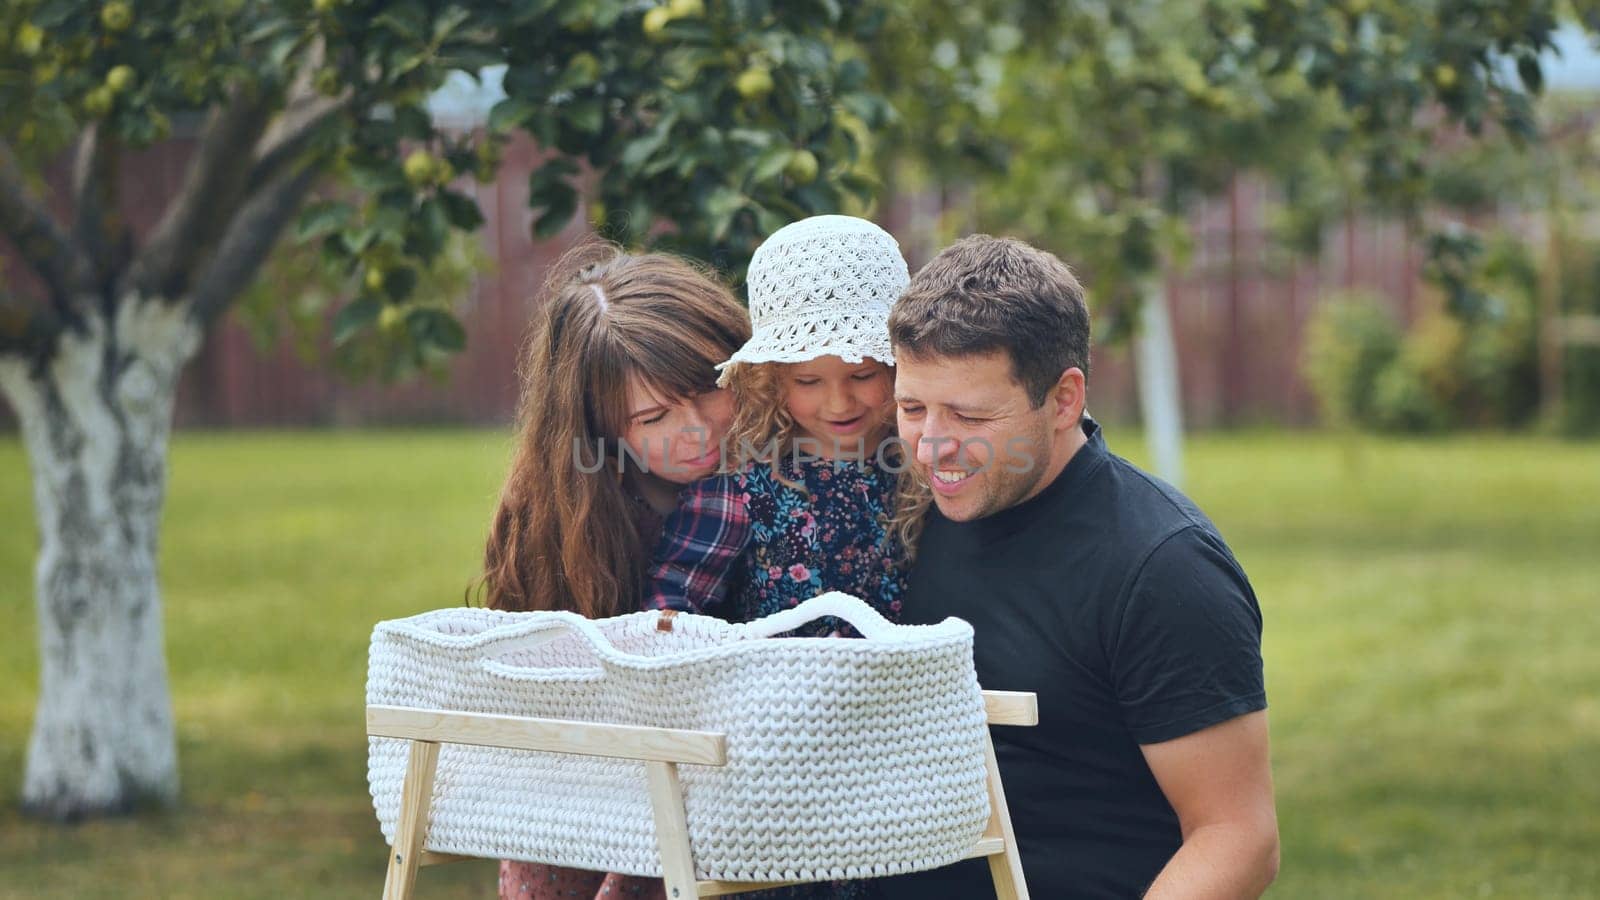 A young family looks at their newborn baby in a cradle in the garden